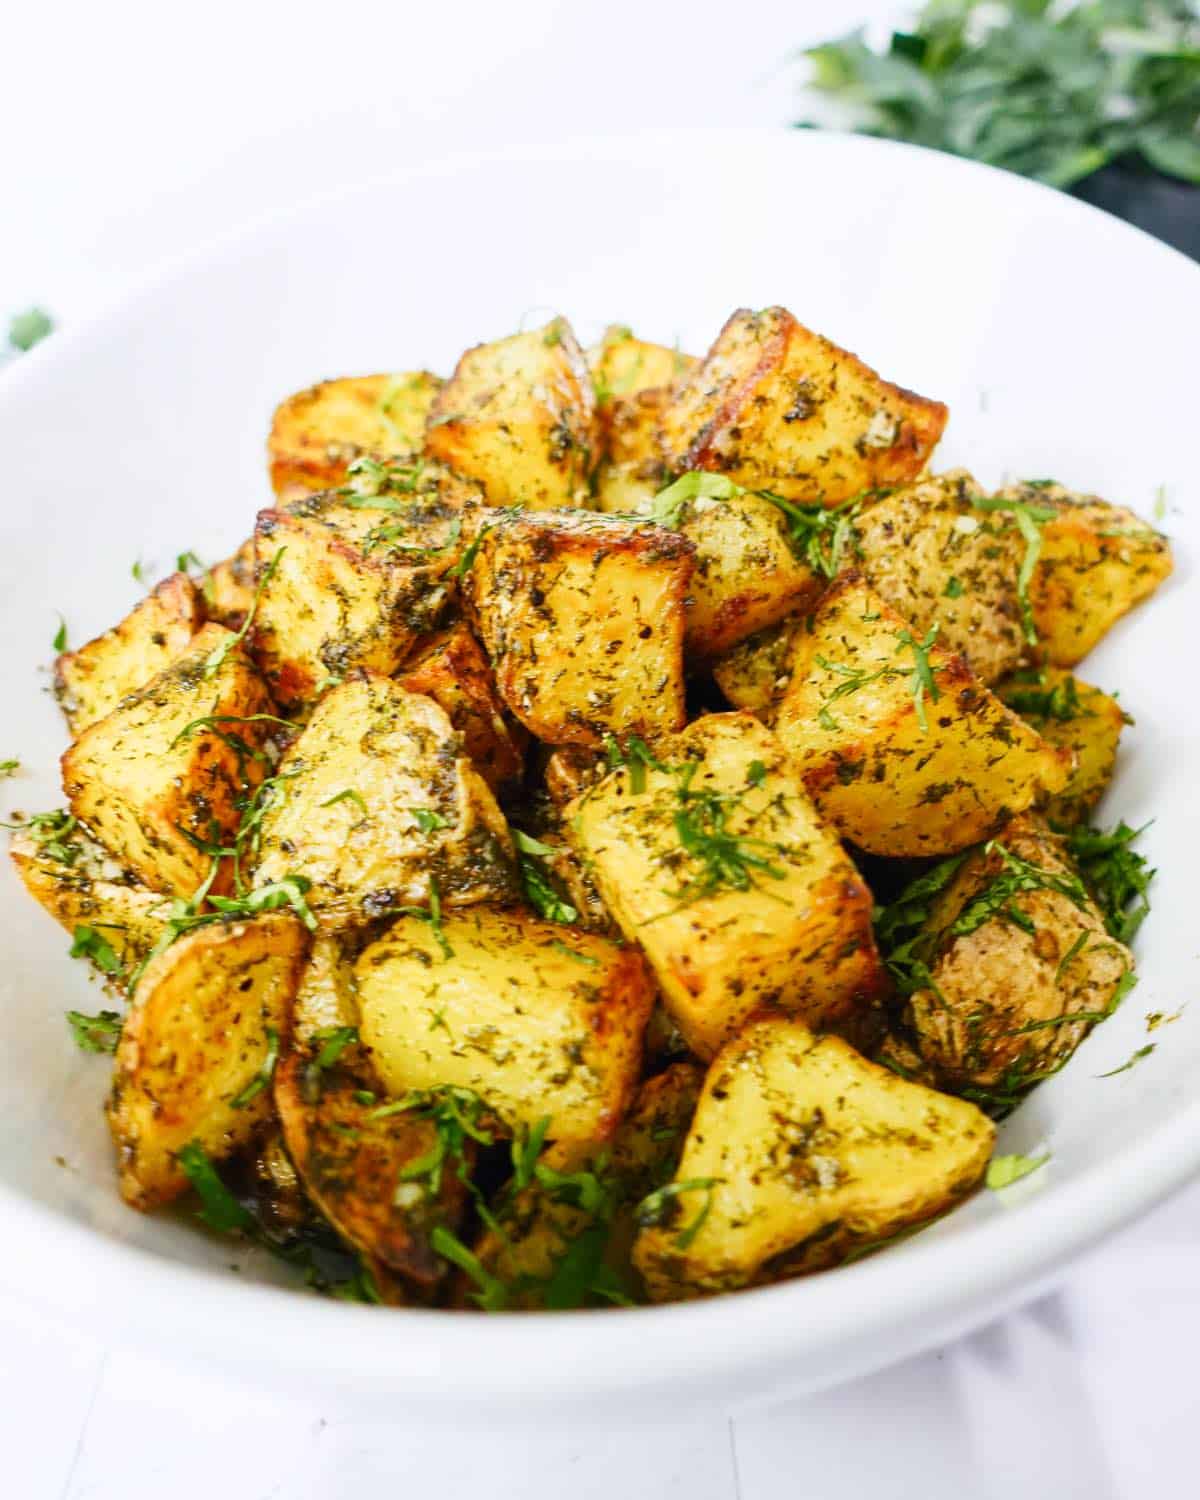 lemon dill potatoes served in a bowl